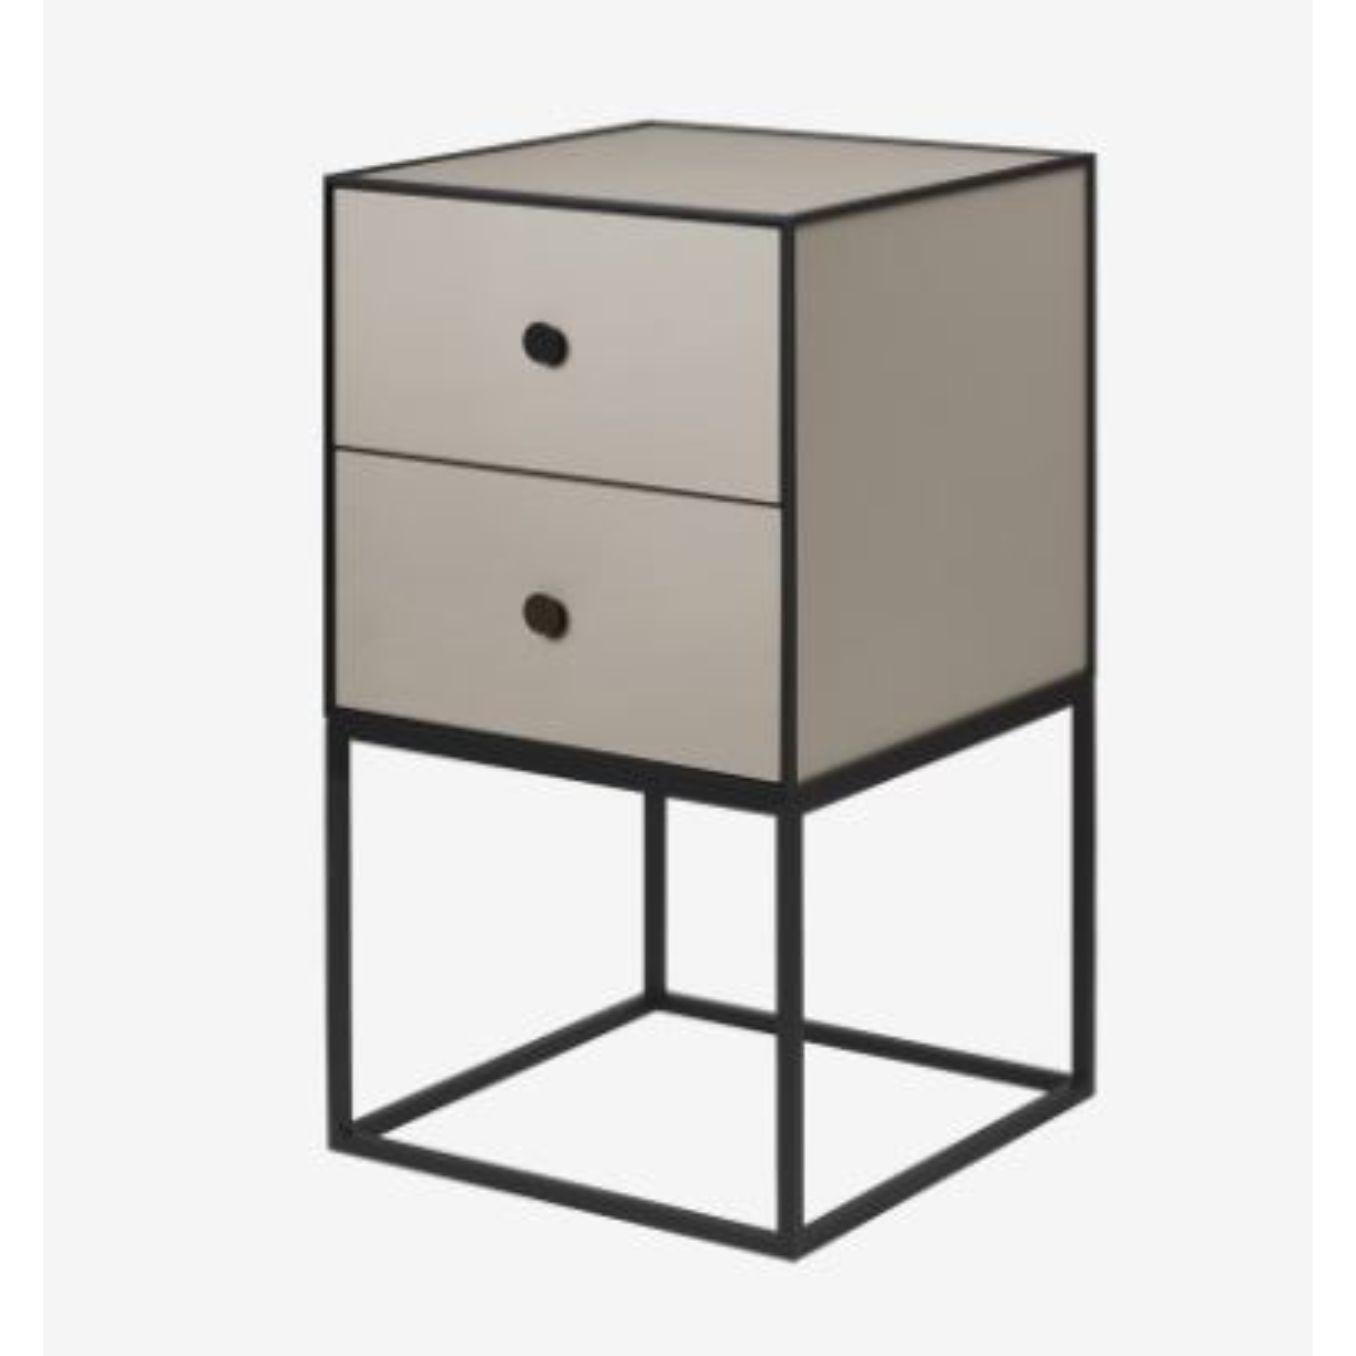 35 sand frame sideboard with 2 drawers by Lassen
Dimensions: D 35 x W 35 x H 63 cm 
Materials: Finér, melamin, melamine, metal, veneer
Also available in different colors and dimensions. 
Weight: 15.50 kg

By Lassen is a Danish design brand